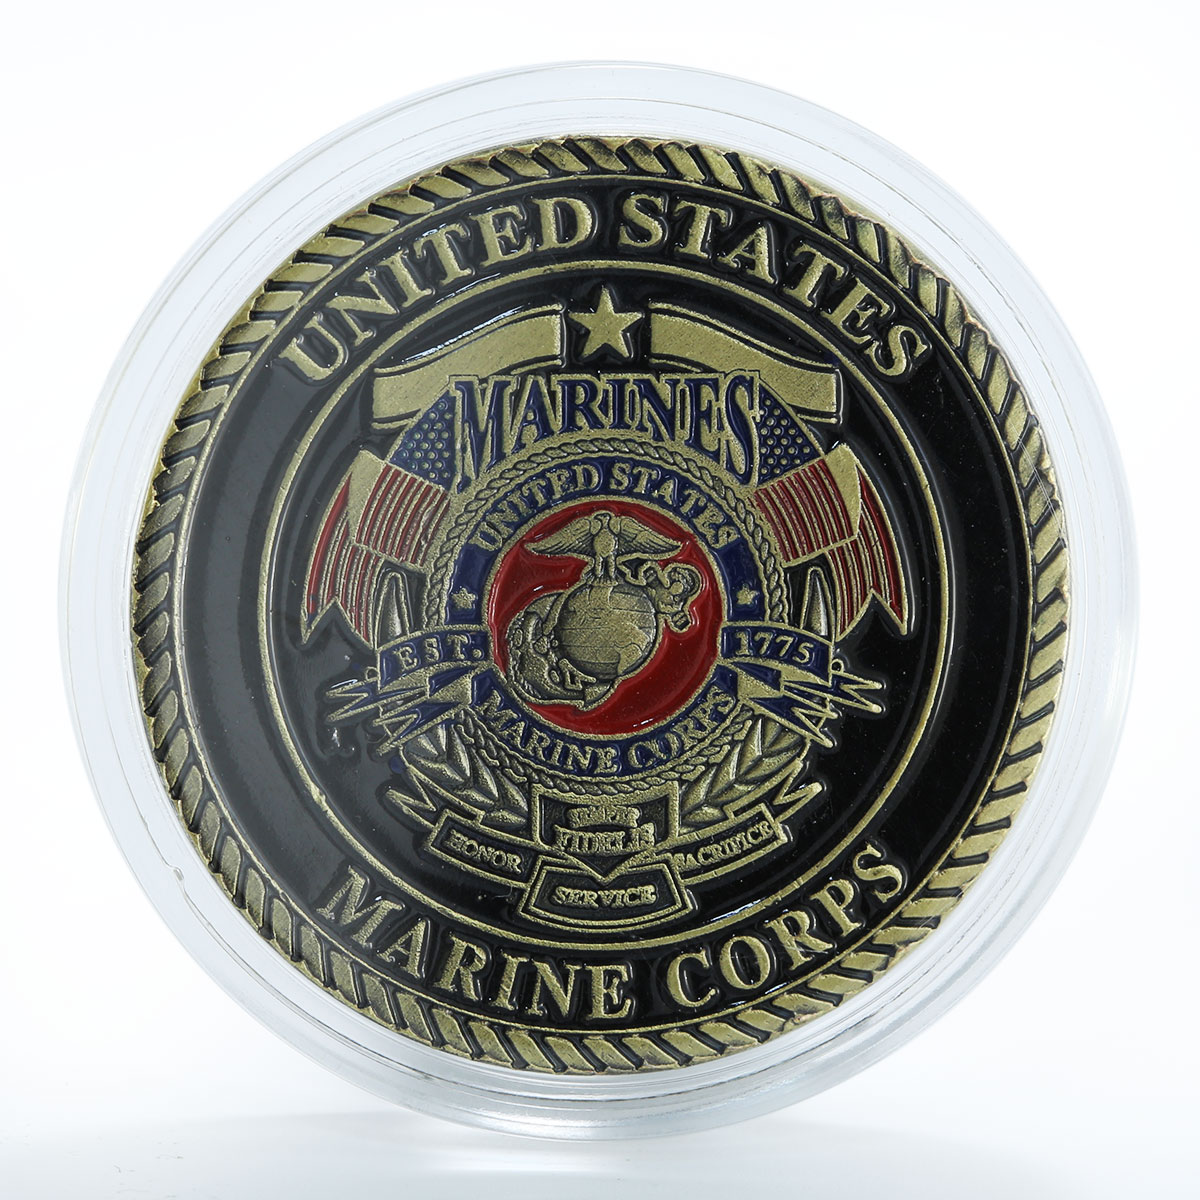 USA Marine Corps Semper Fidelis Release The Dogs of War Military token